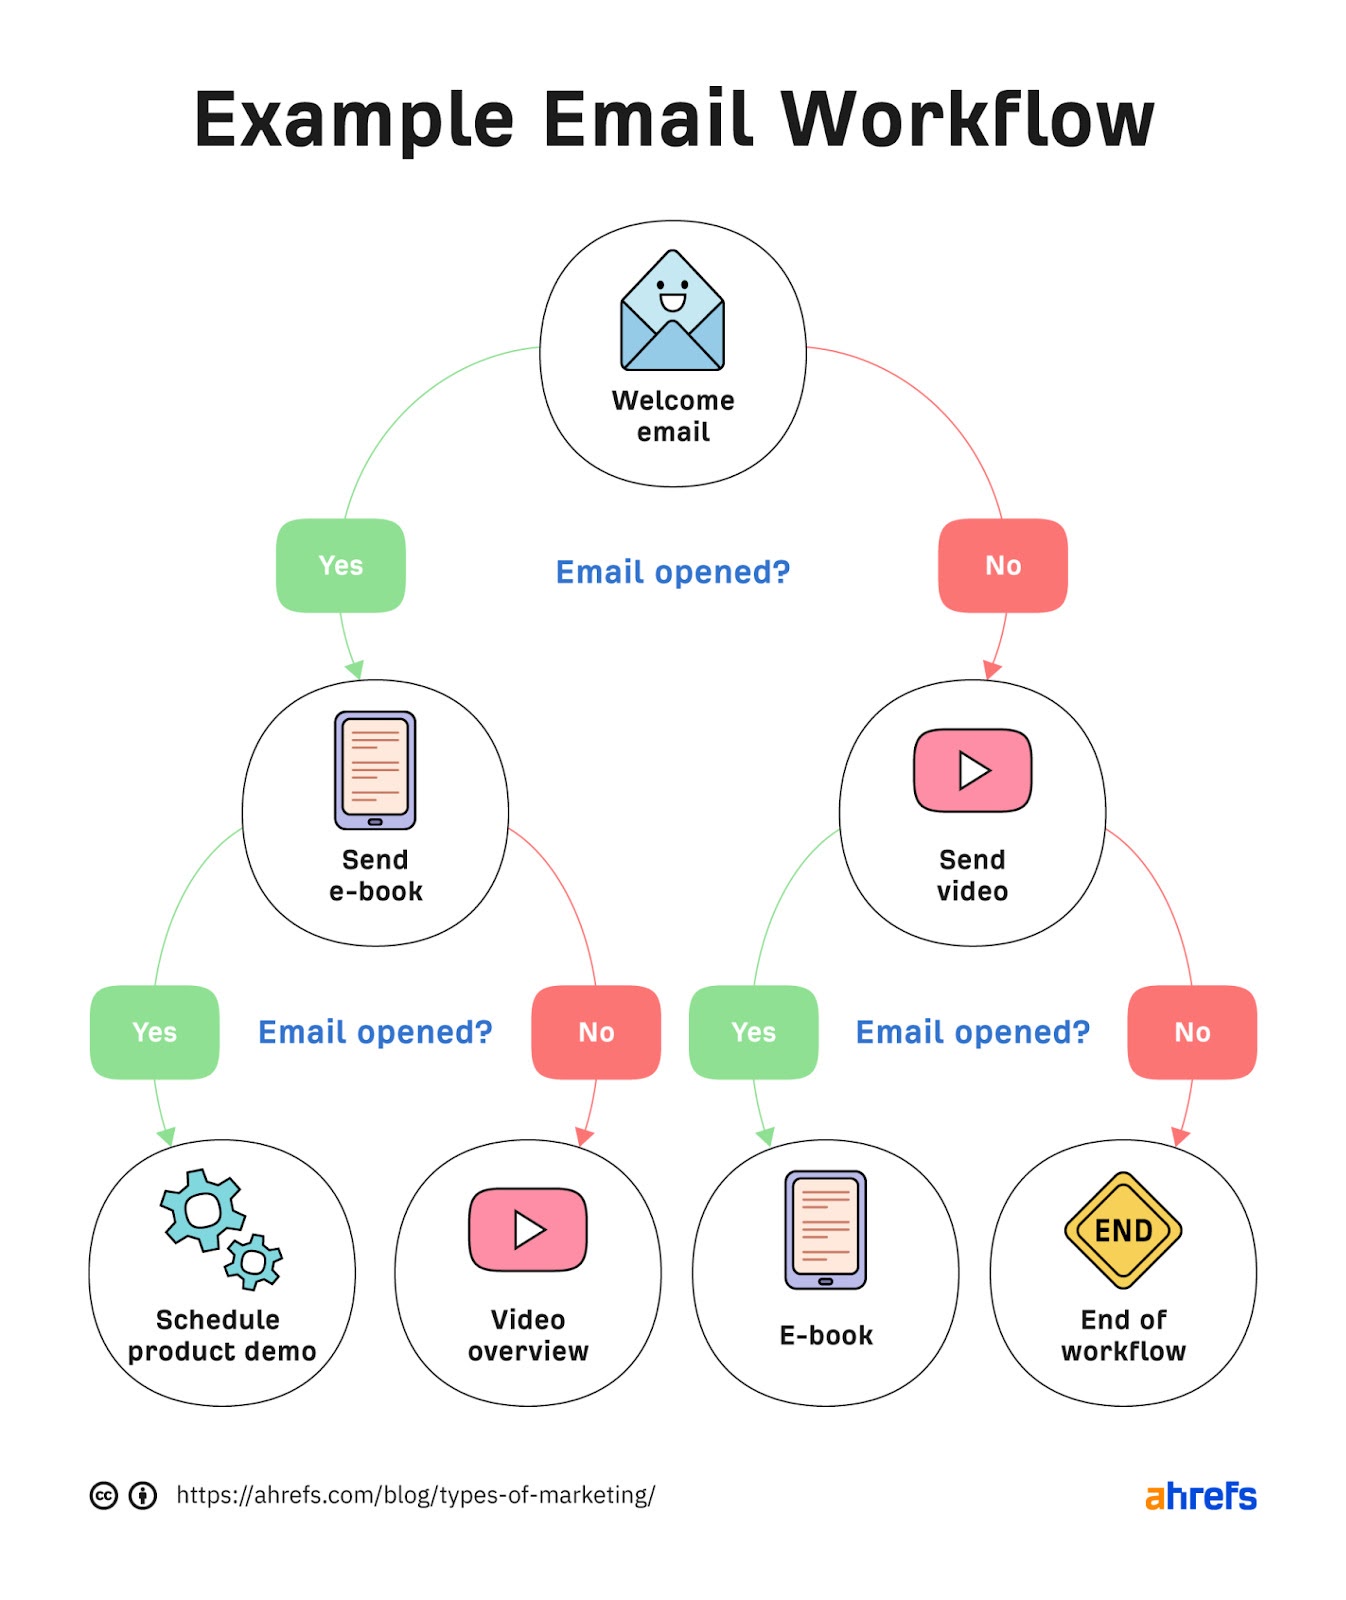 Example of an email workflow